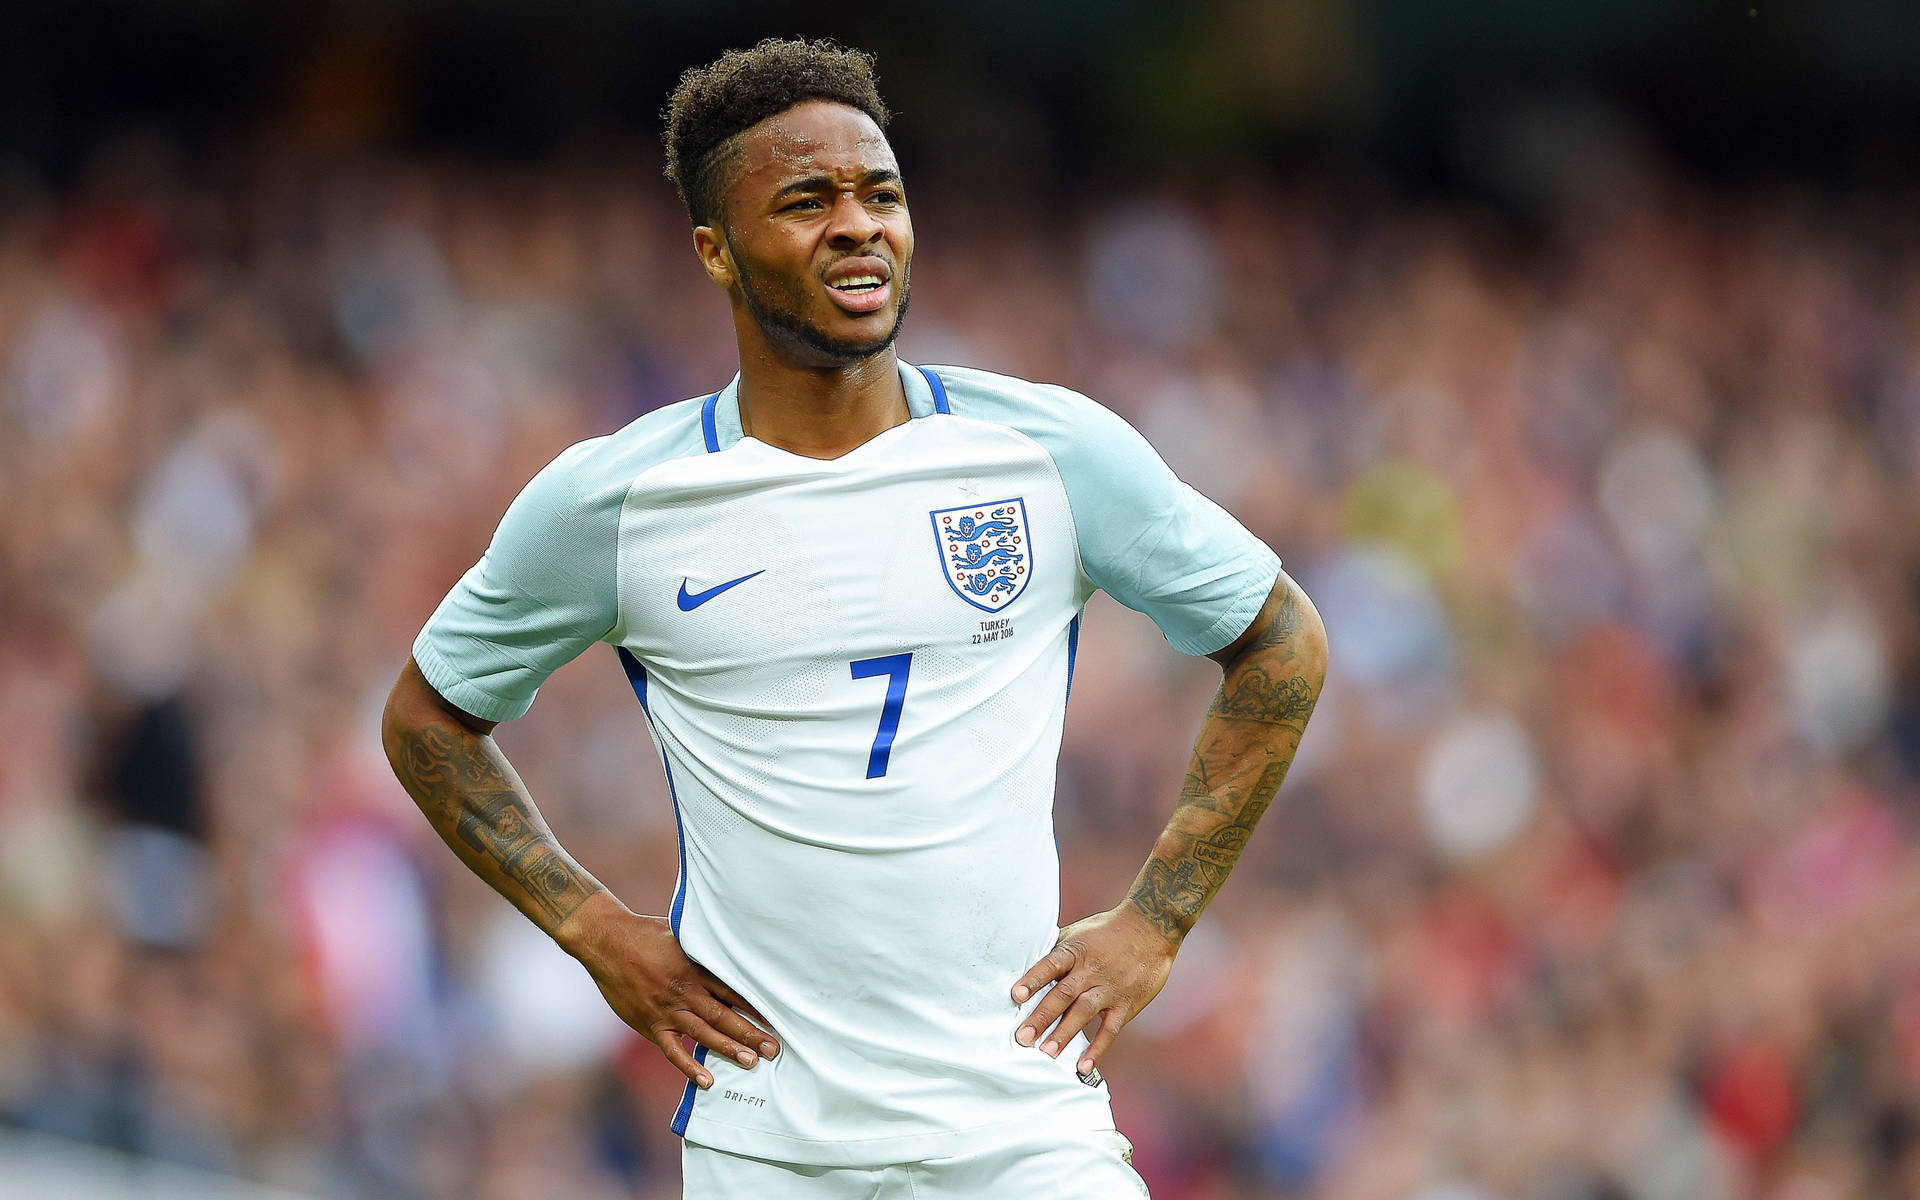 Raheem Sterling In White Dri-fit Background